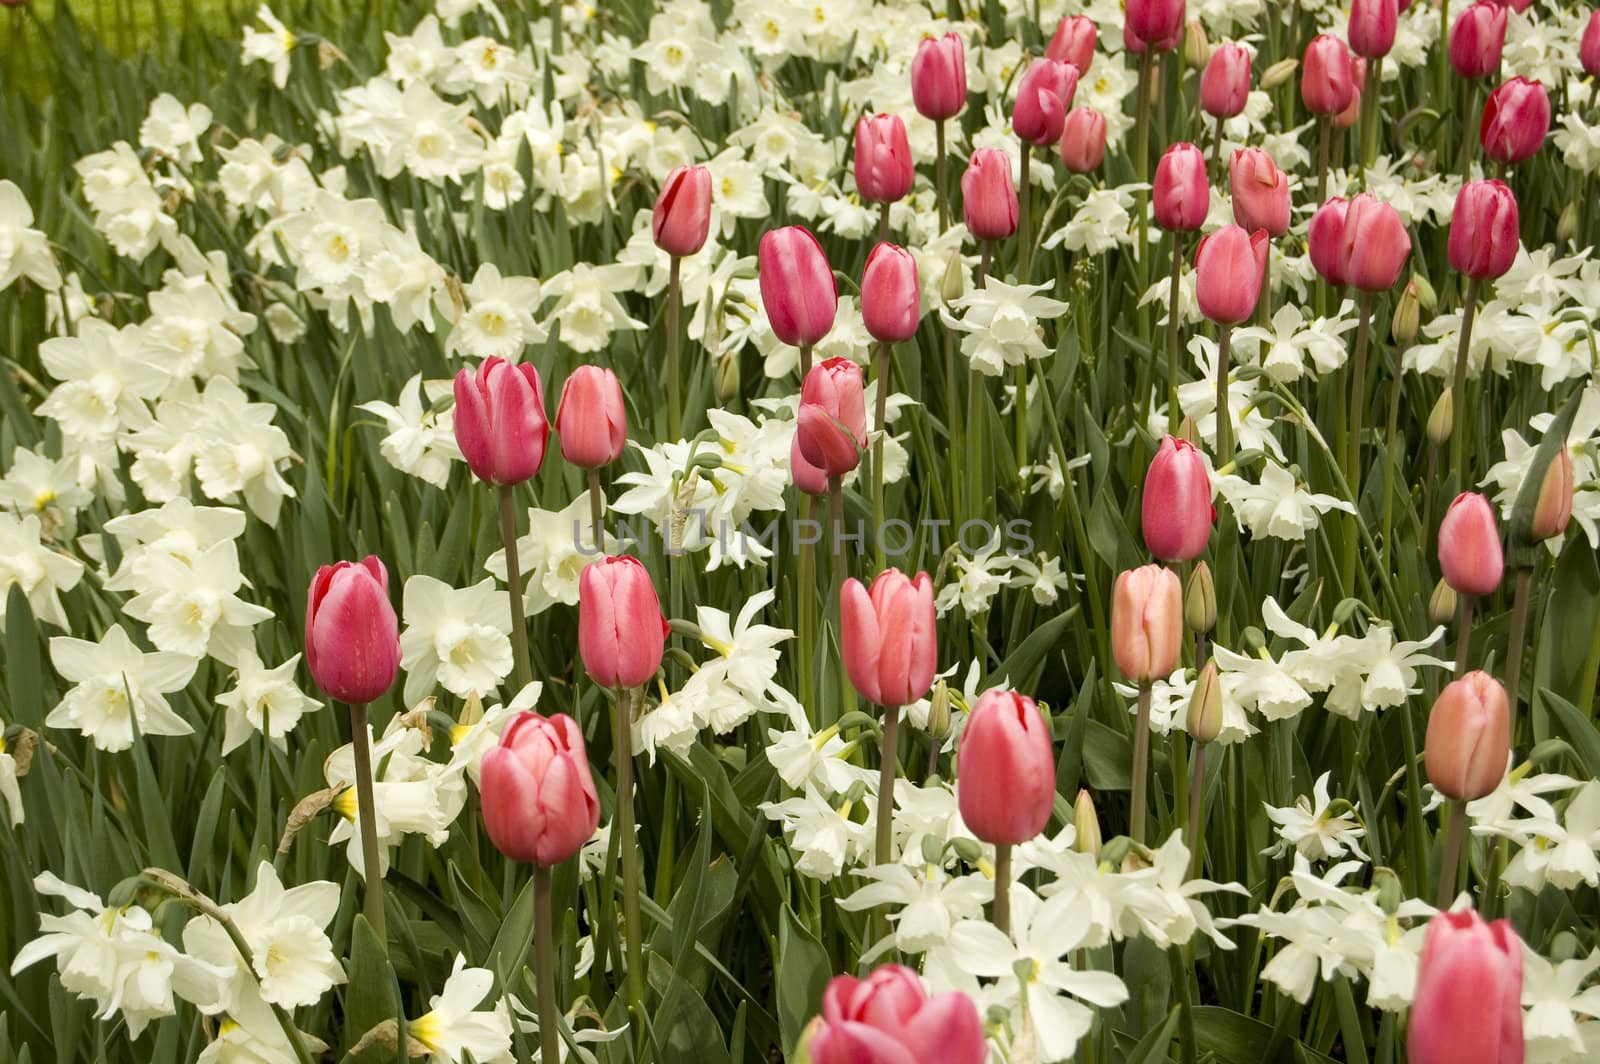 field of red tulips and white narcisses